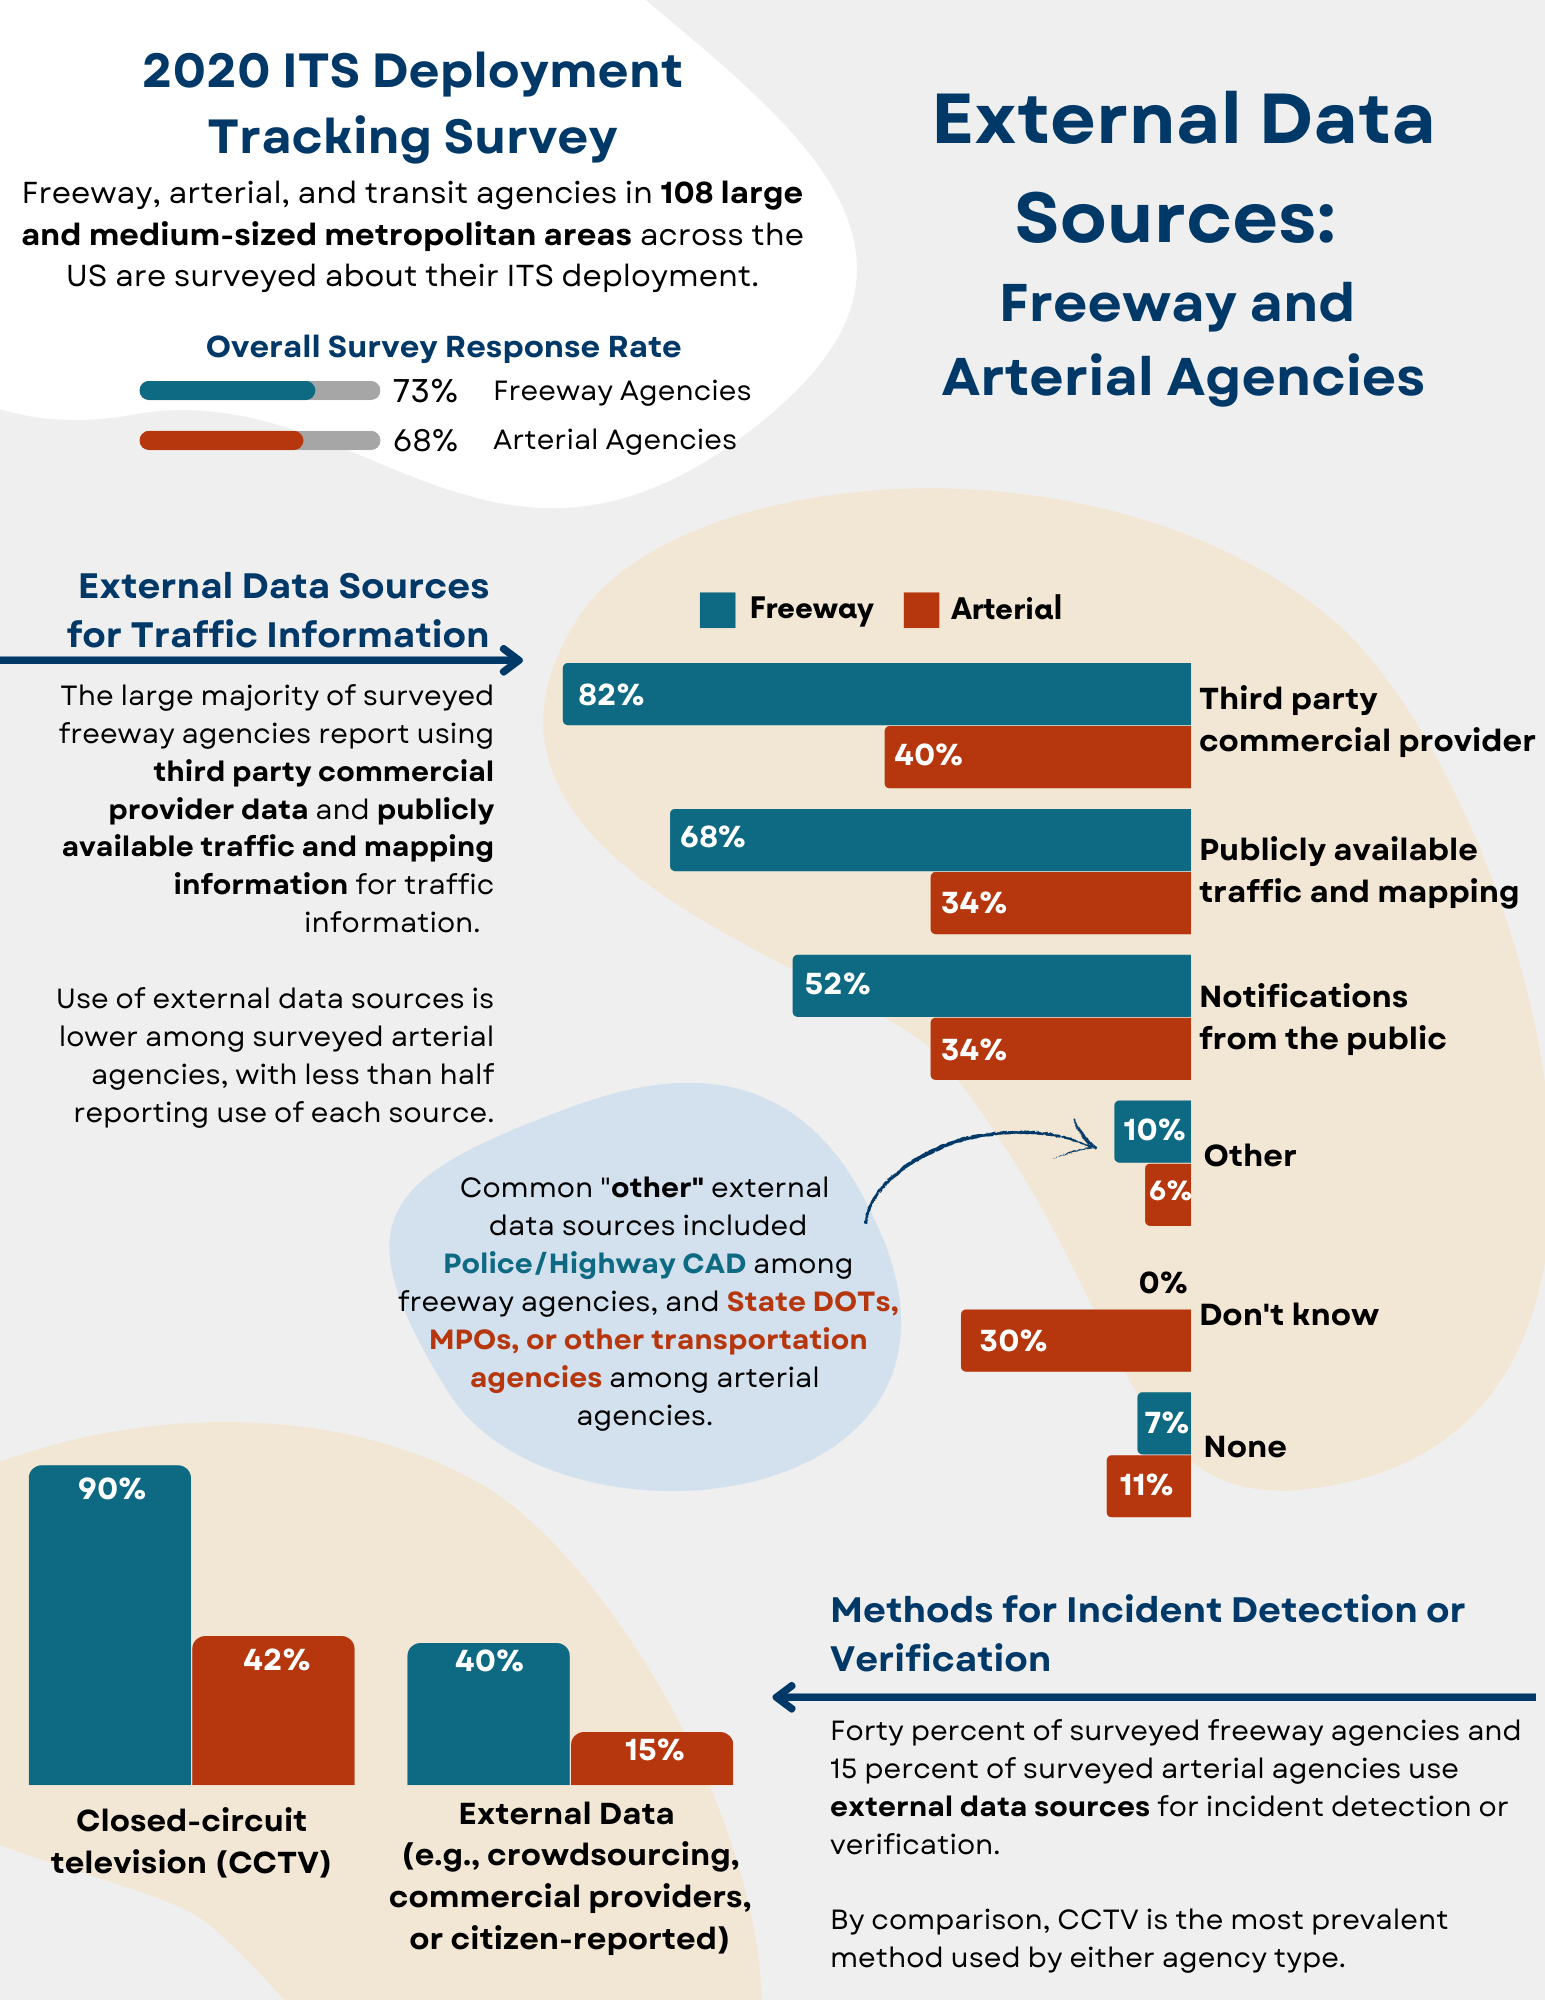 Insights from the 2020 DTS on external data sources for freeway and arterial agencies, indicating that the large majority of surveyed freeway agencies report using third party commercial provider data and publicly available traffic and mapping information for traffic information.